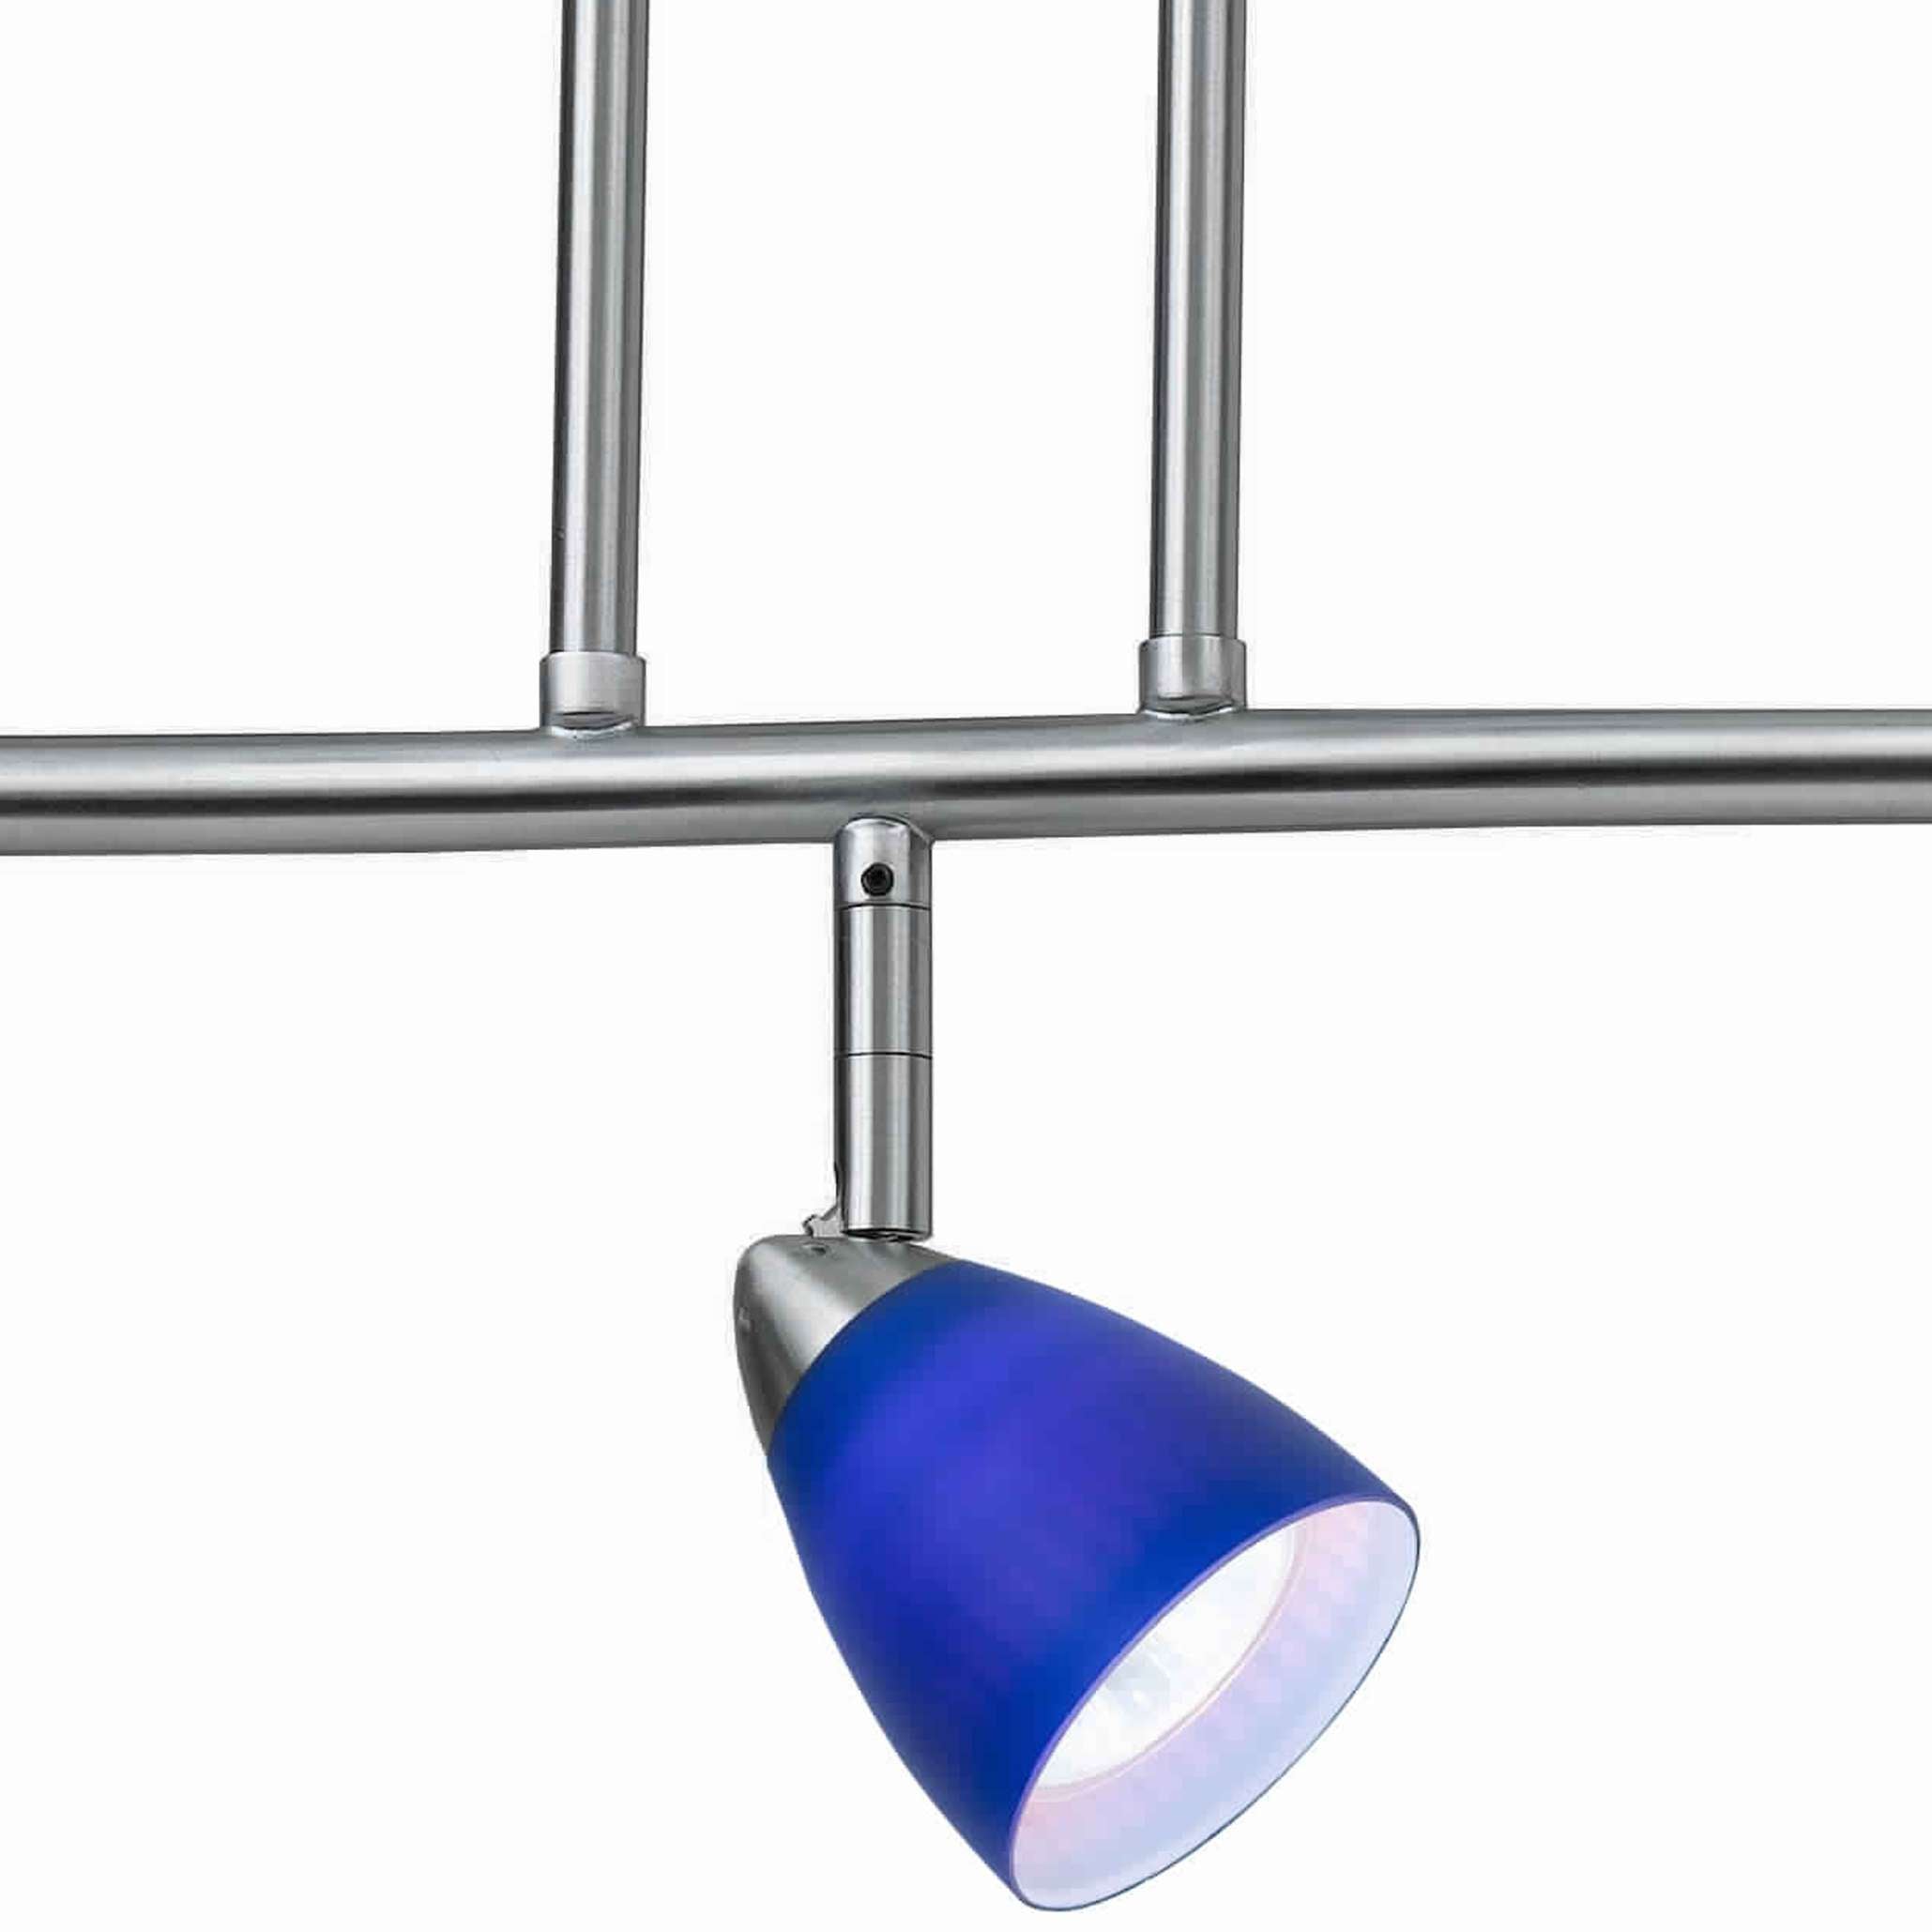 3 Light 120V Metal Track Light Fixture With Glass Shade, Silver And Blue By Benzara